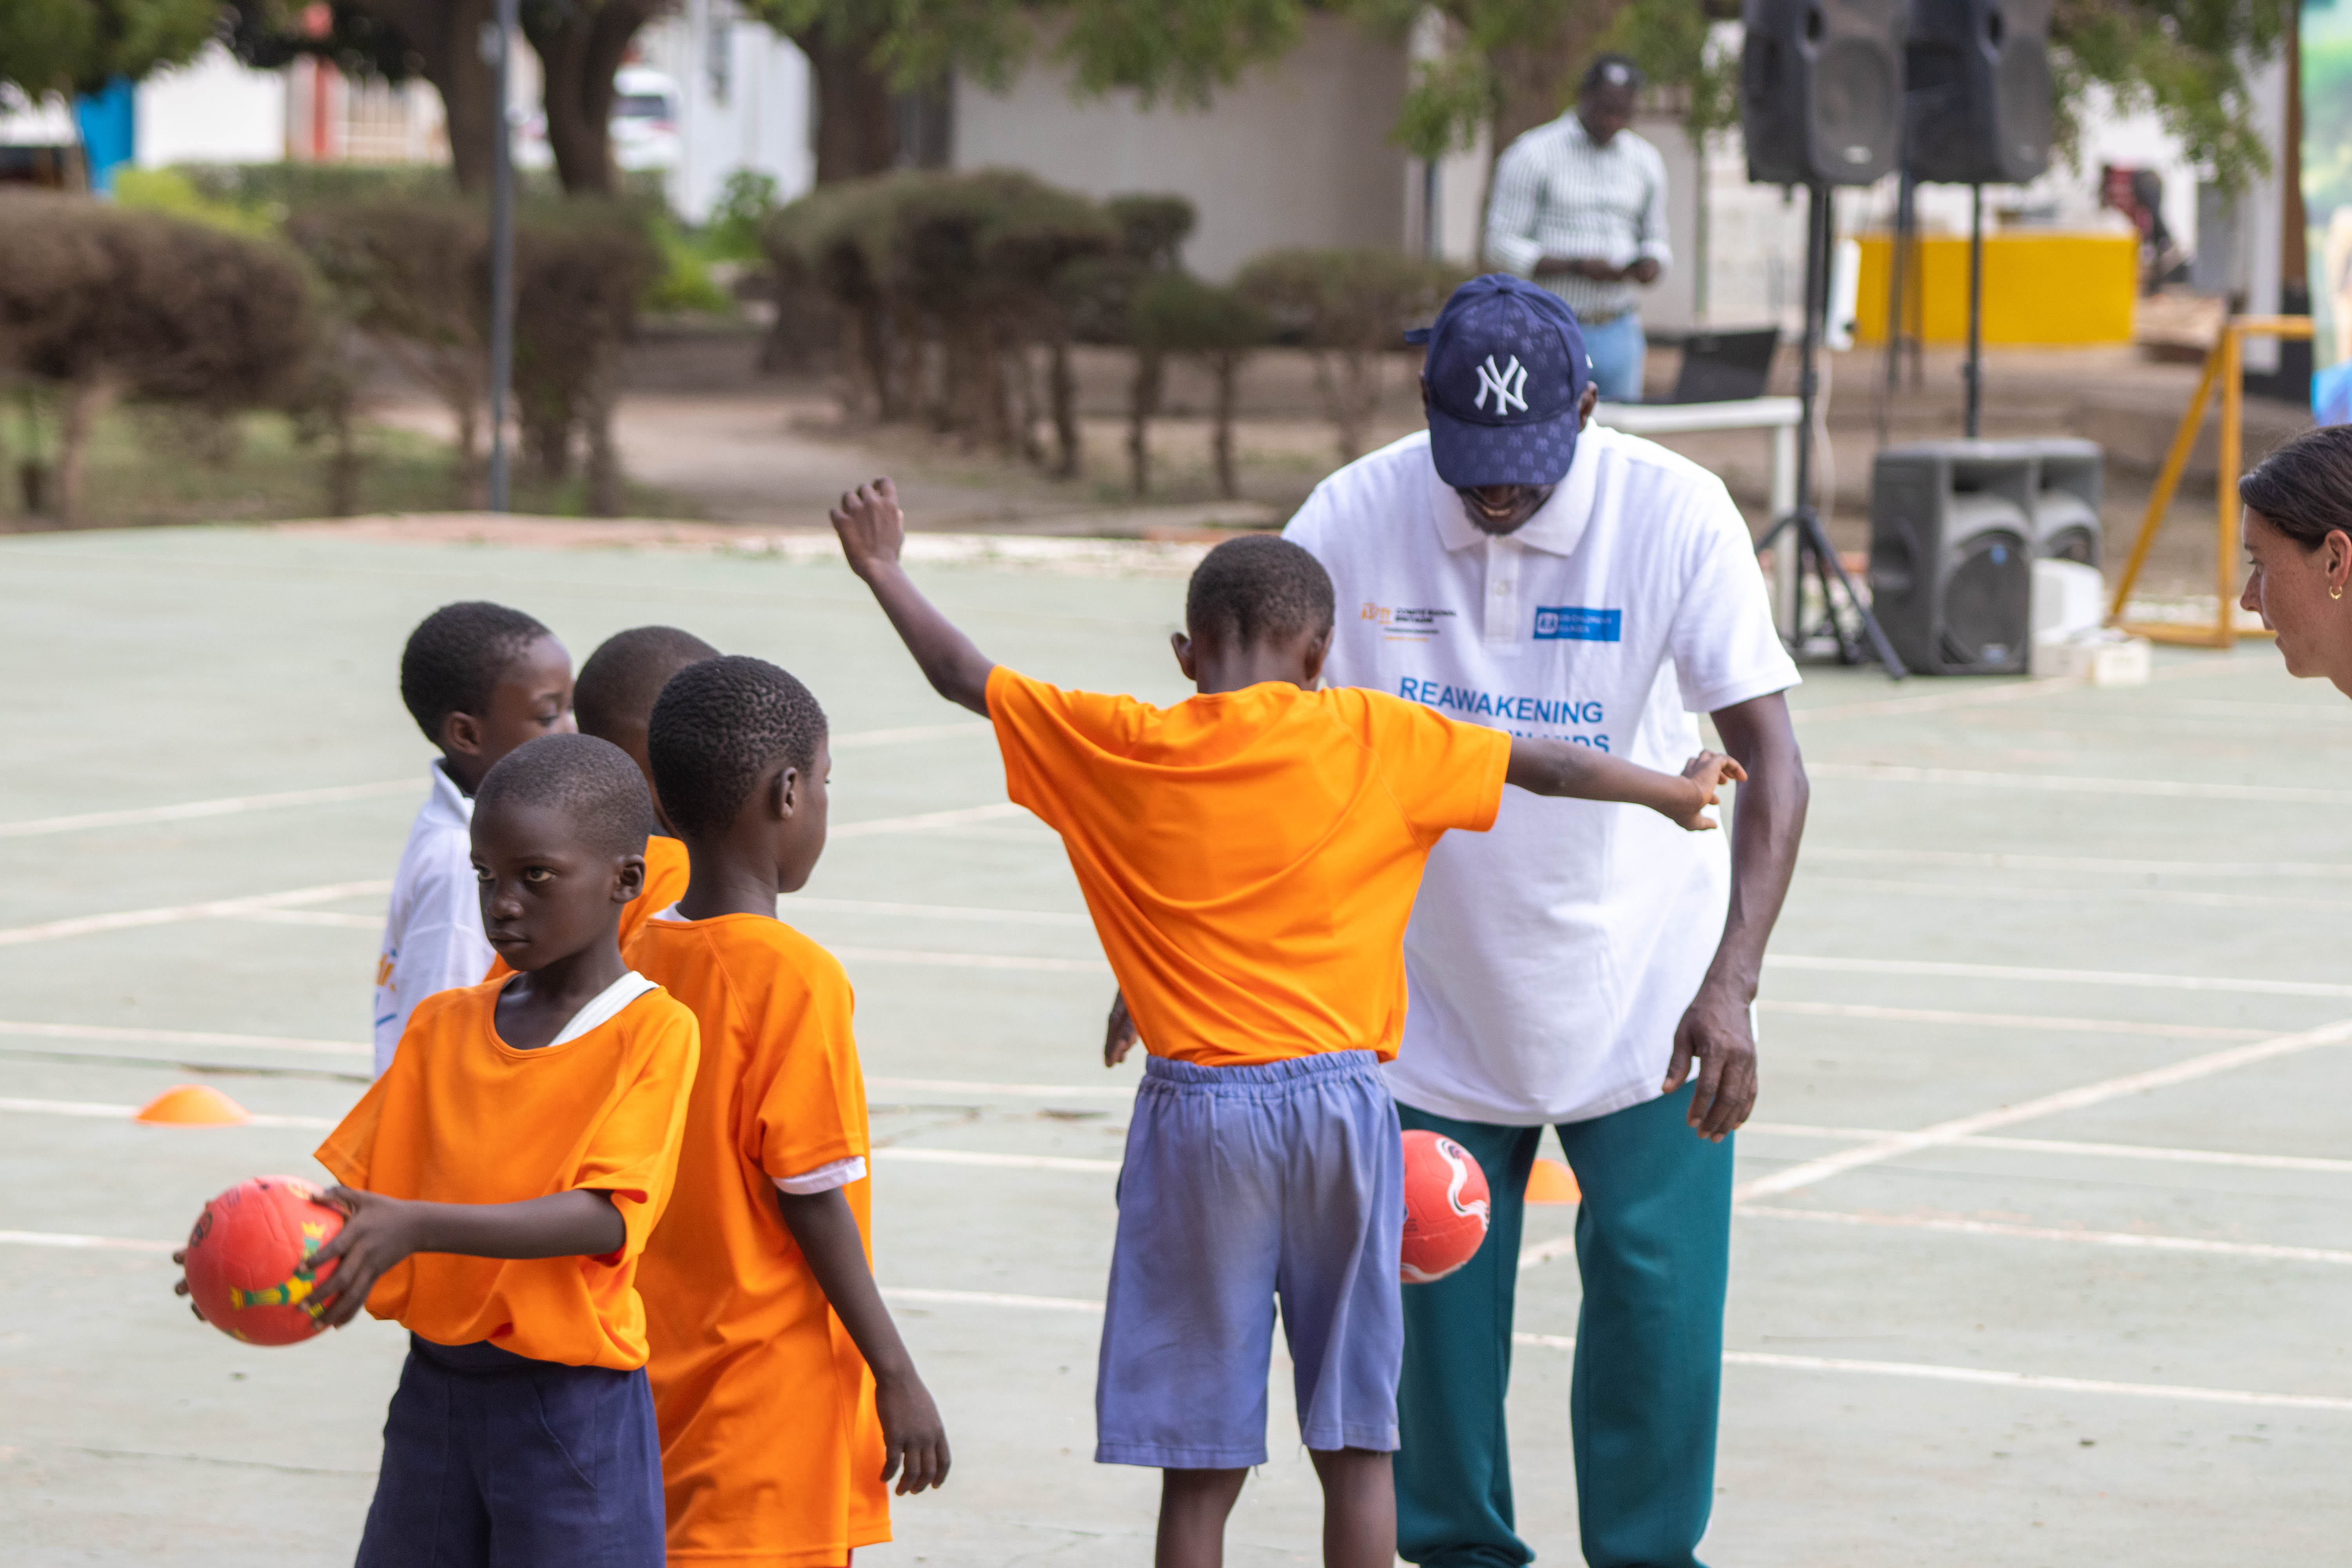 SOS Children’s Villages in partnership with ASPTT launches Kidisport in The Gambia.